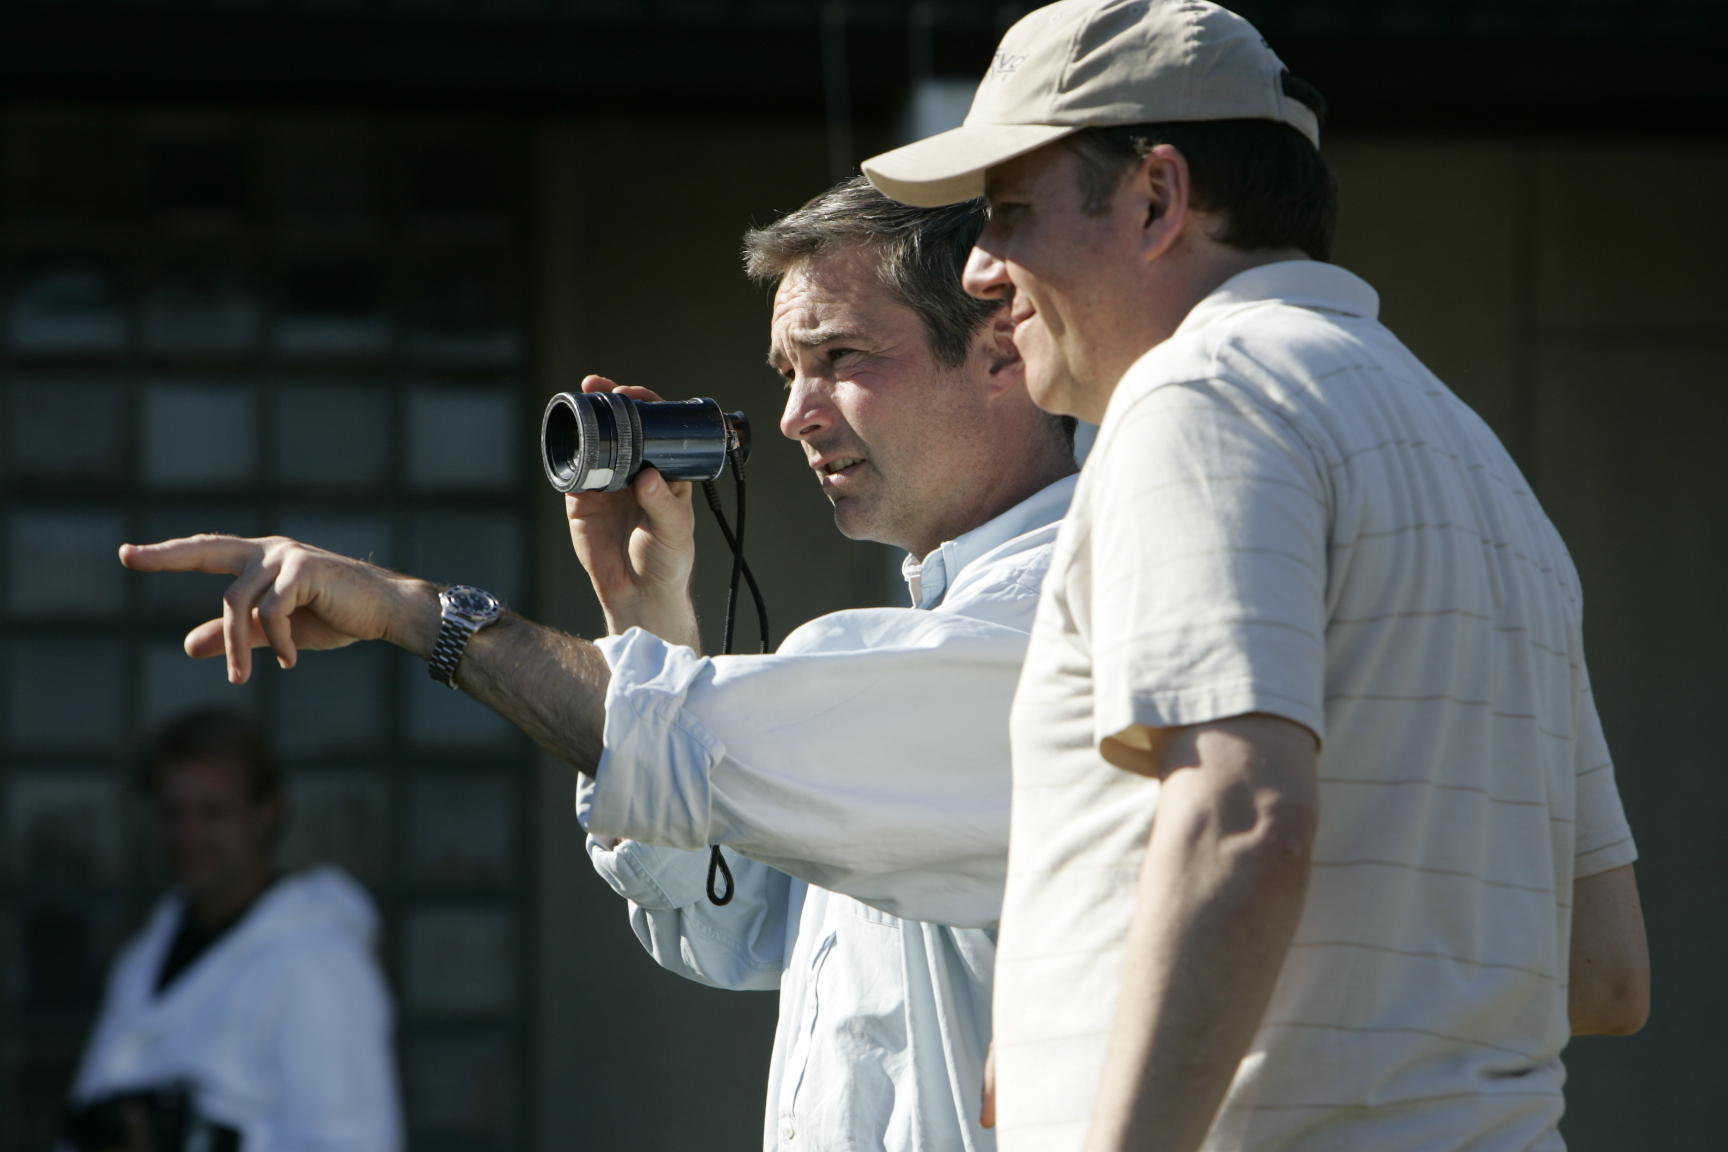 Director of Photography ERIC KRESS and director PETER FLINTH on the set of 